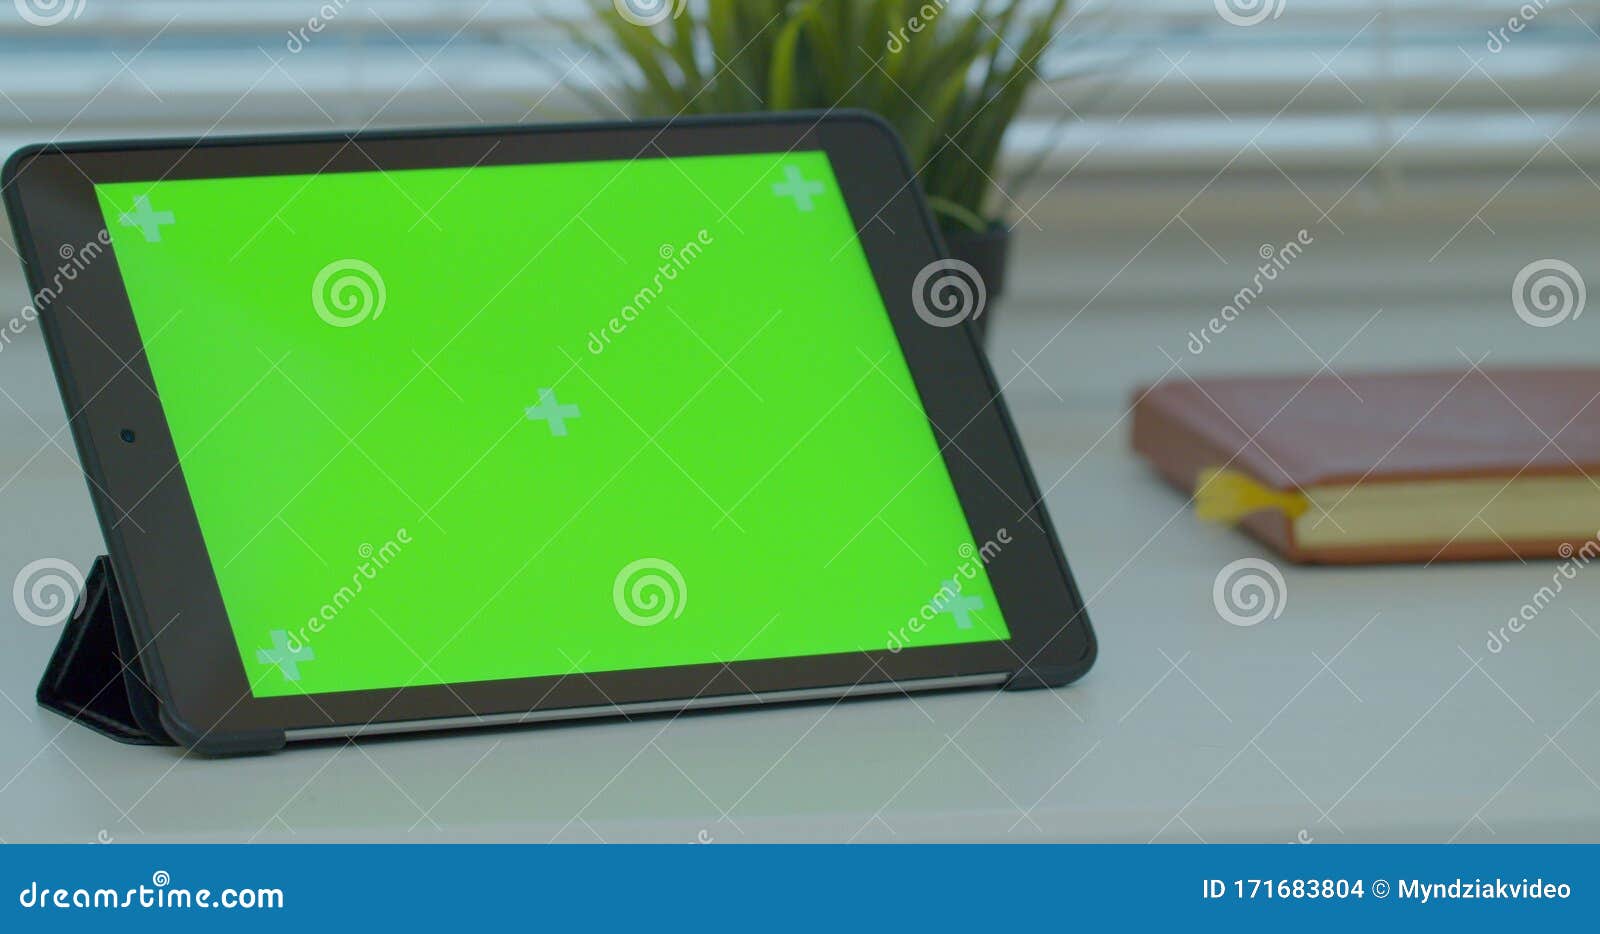 black tabletpc on a desk with green screen and book. close up 4k footage.